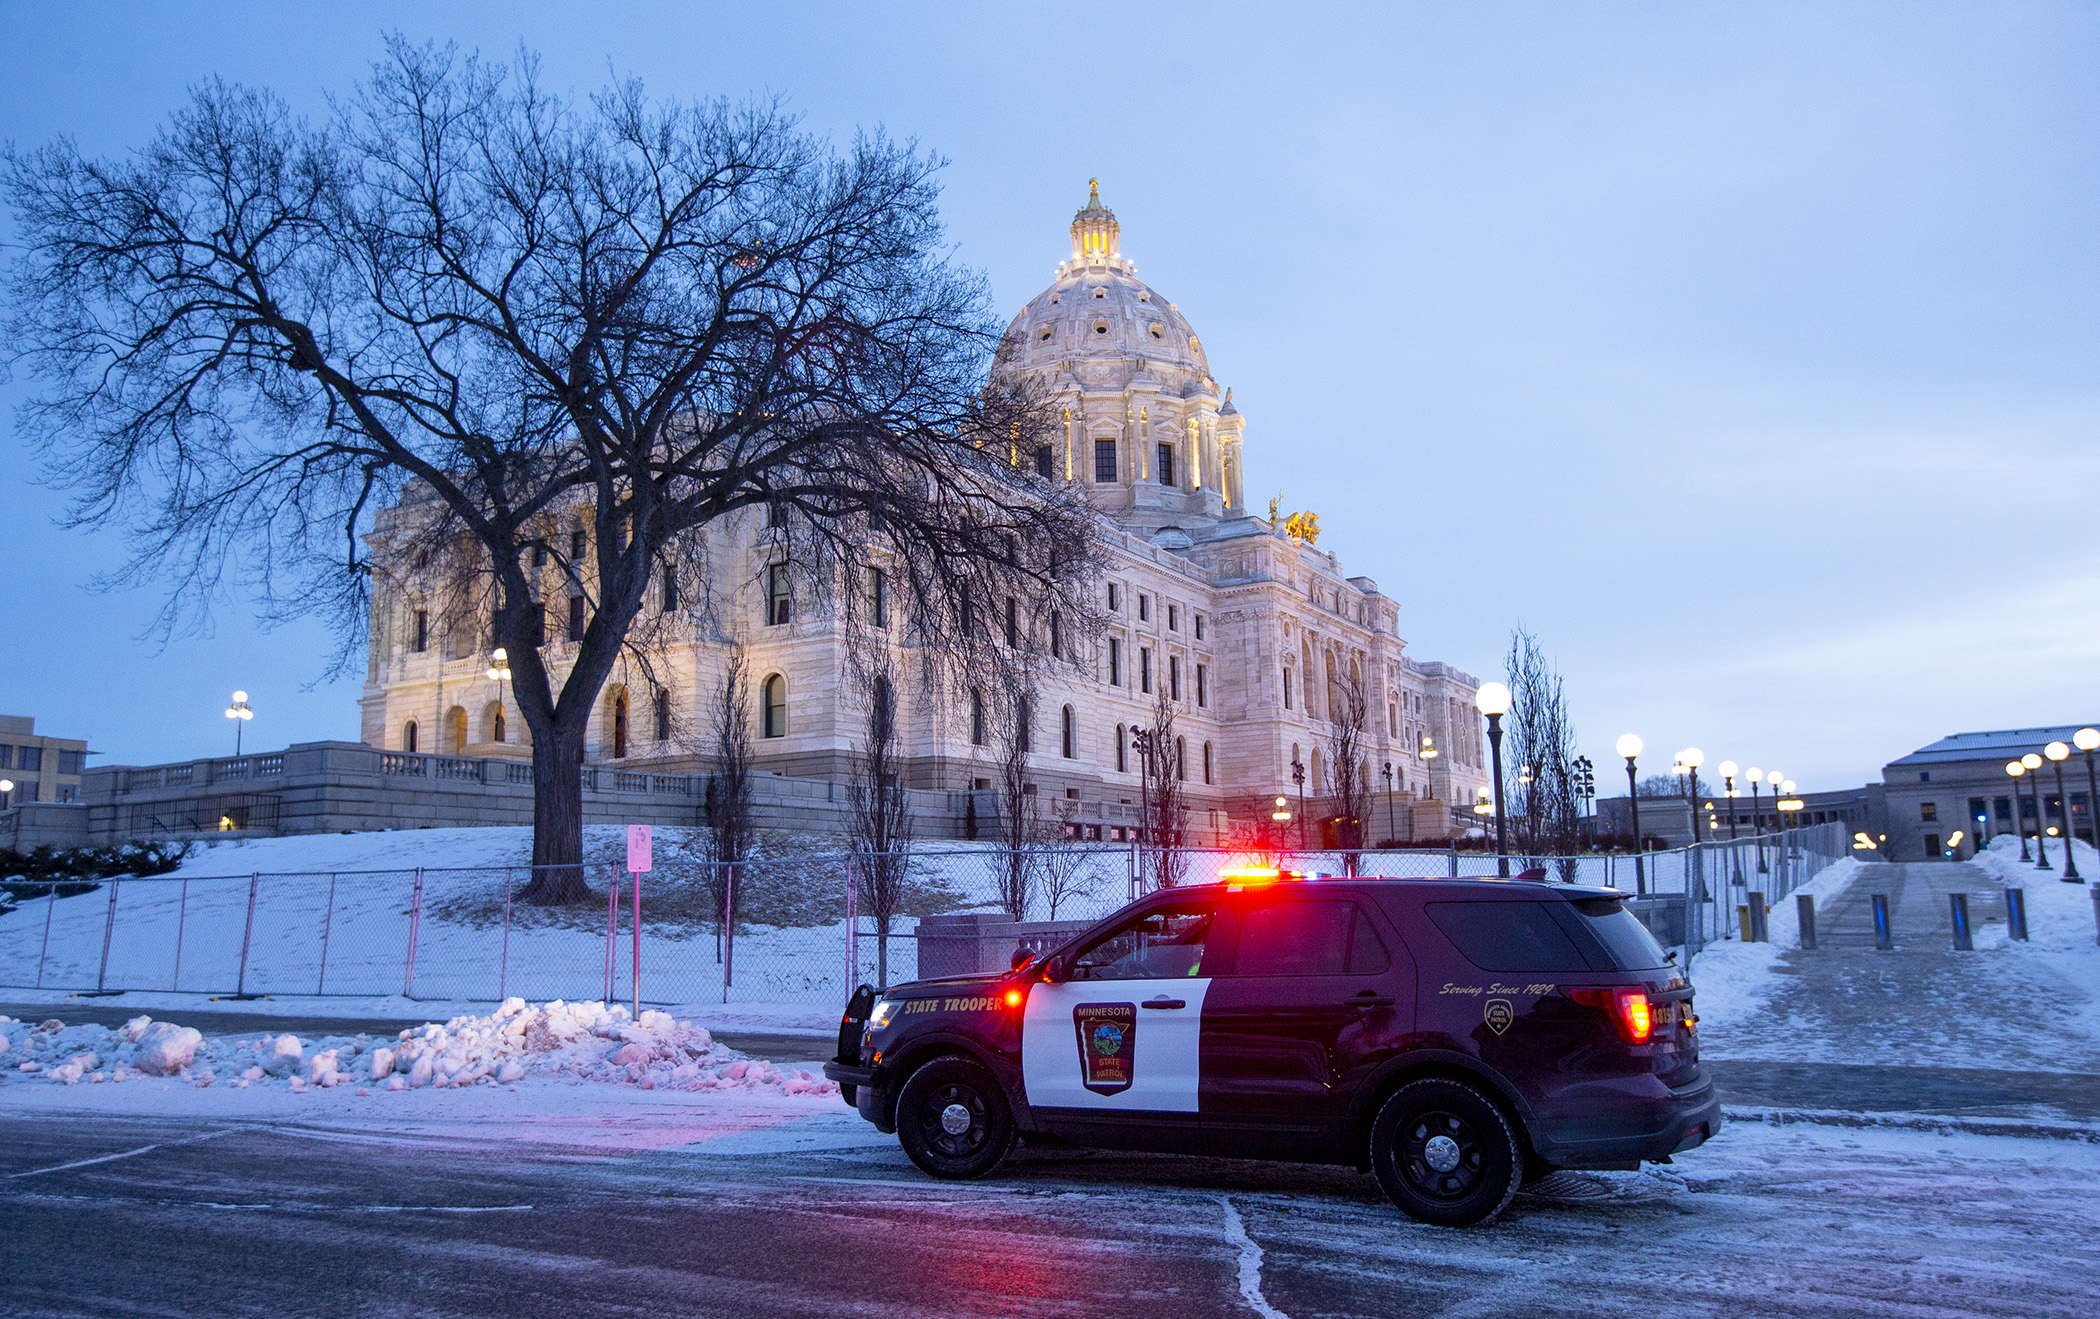 A Minnesota State Patrol squad car is part of the increased security presence outside the State Capitol Jan. 20, following the attack on the U.S. Capitol two weeks earlier. Photo by Paul Battaglia